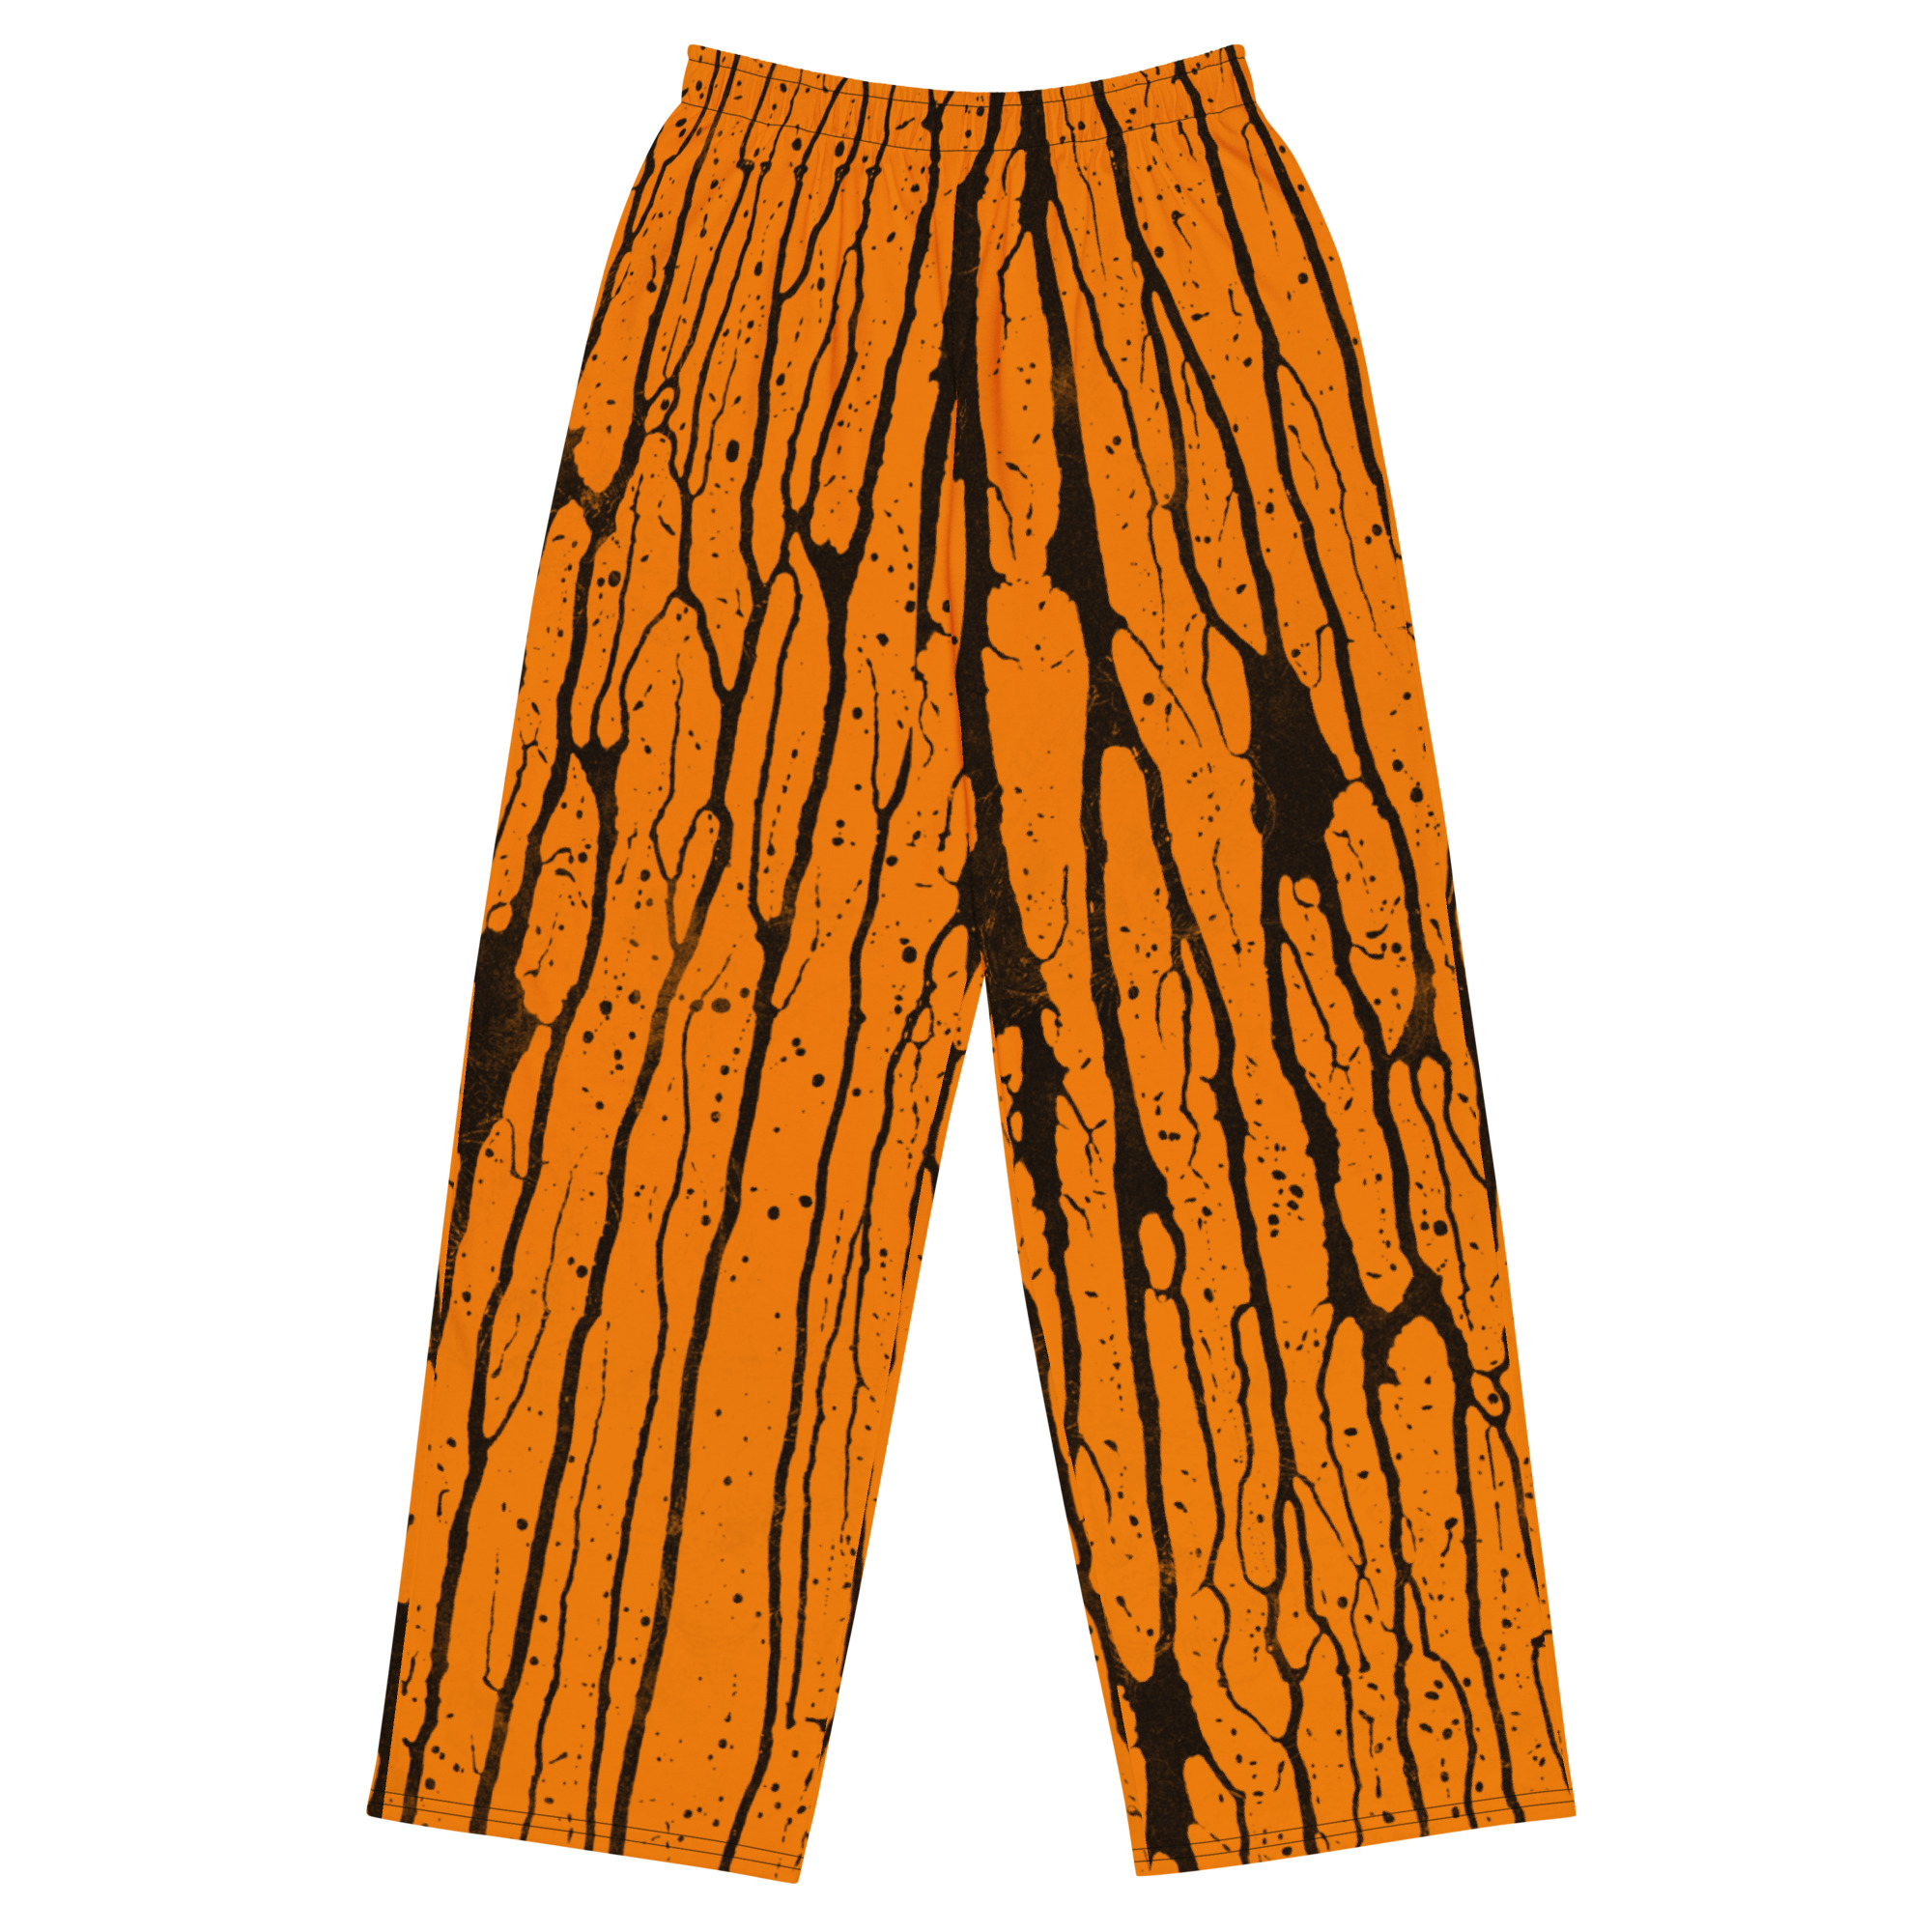 Featured image for “Grunge drip Orange - All-over print unisex wide-leg pants”